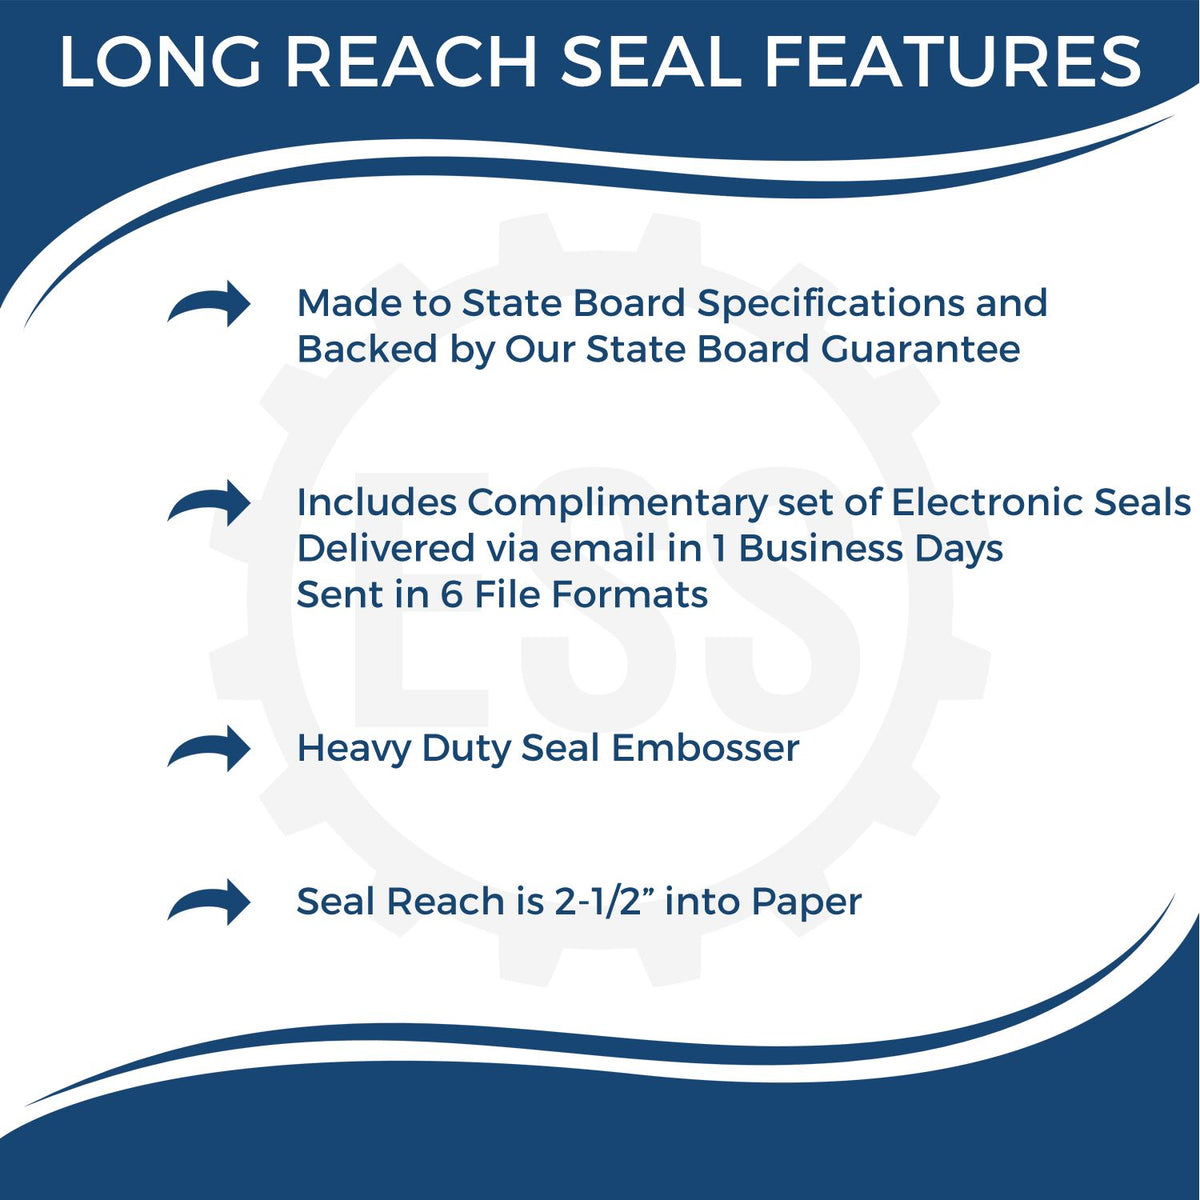 A picture of an infographic highlighting the selling points for the Long Reach Vermont PE Seal